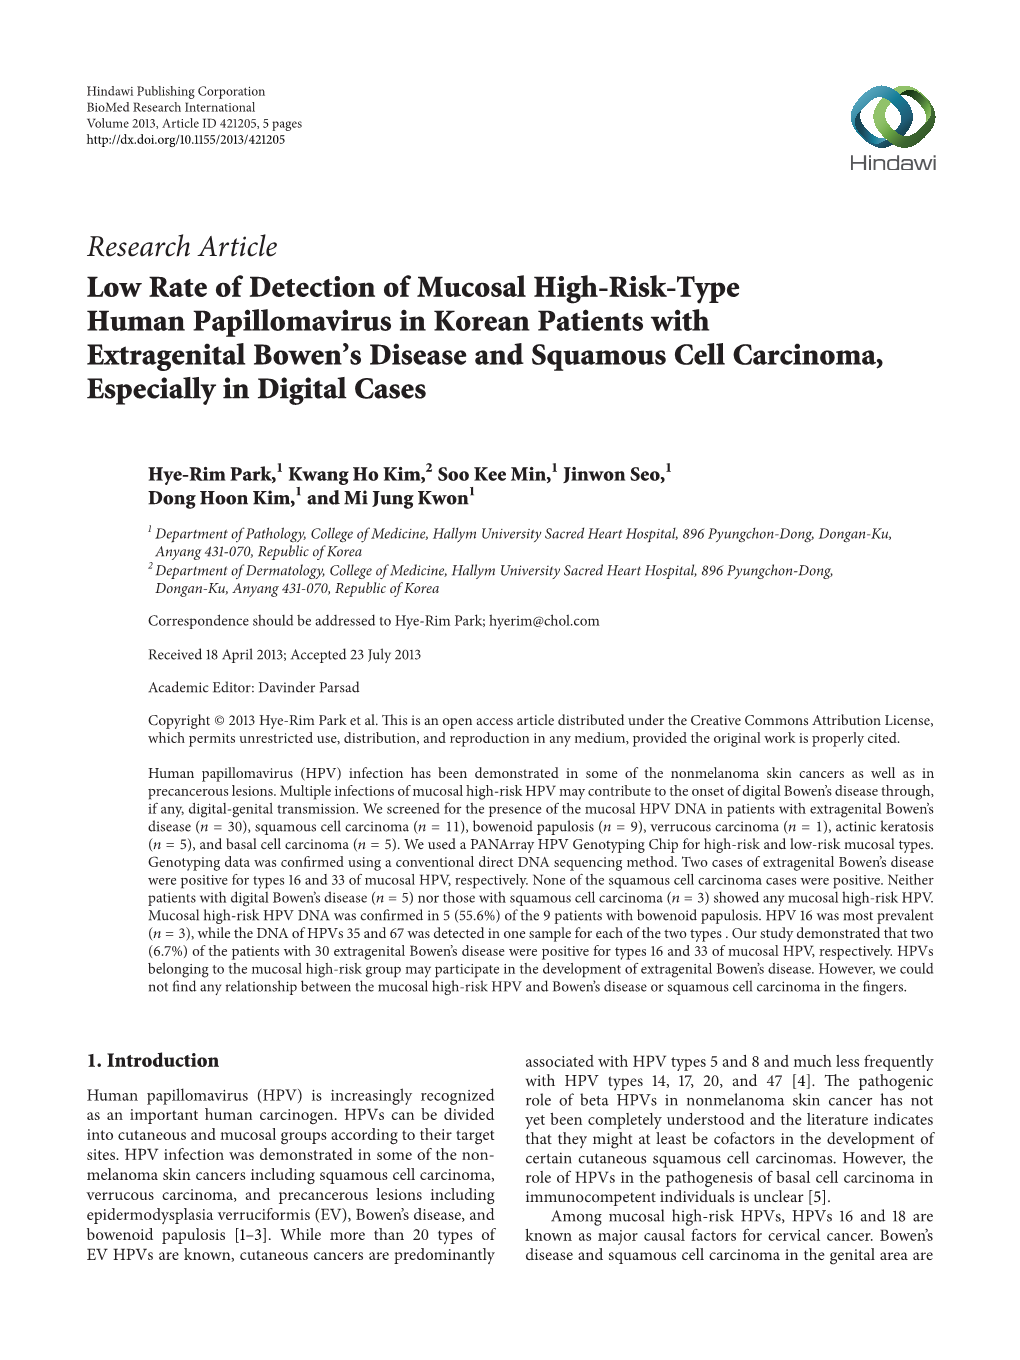 Low Rate of Detection of Mucosal High-Risk-Type Human